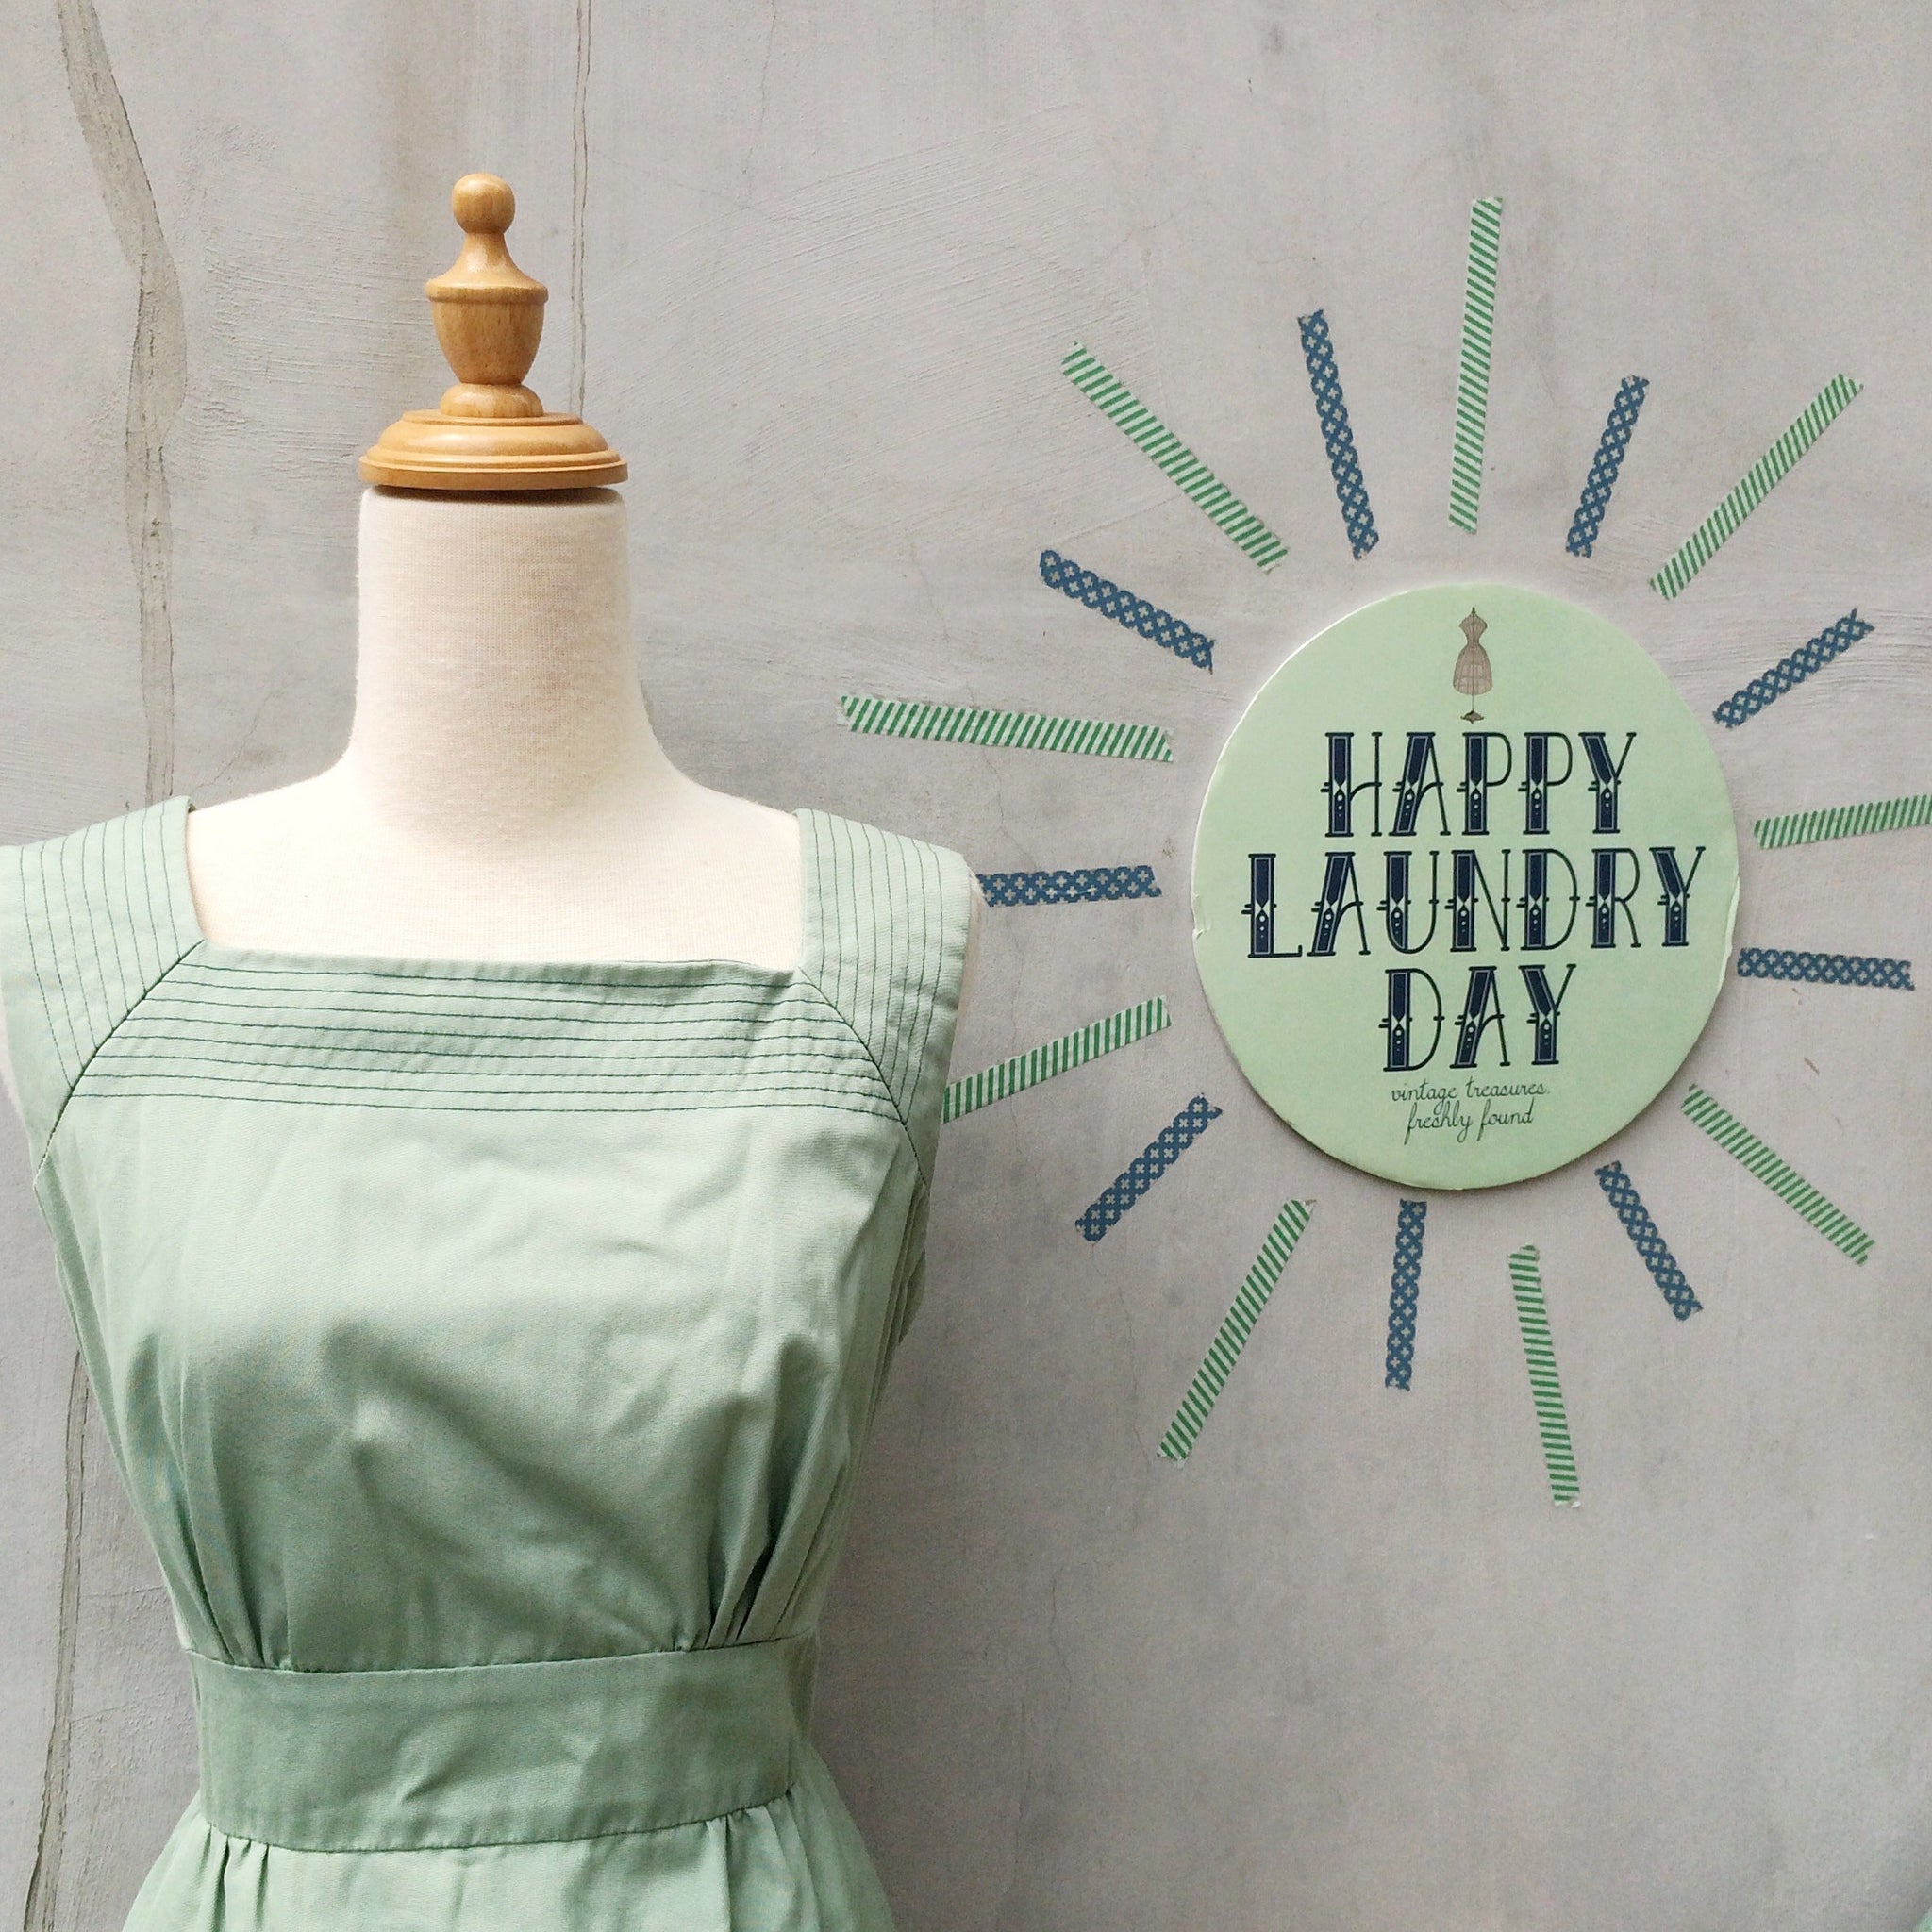 Must Have! | A Good Girl | Vintage girl scout green 1950s 1960s Sundress with slant stitched pockets